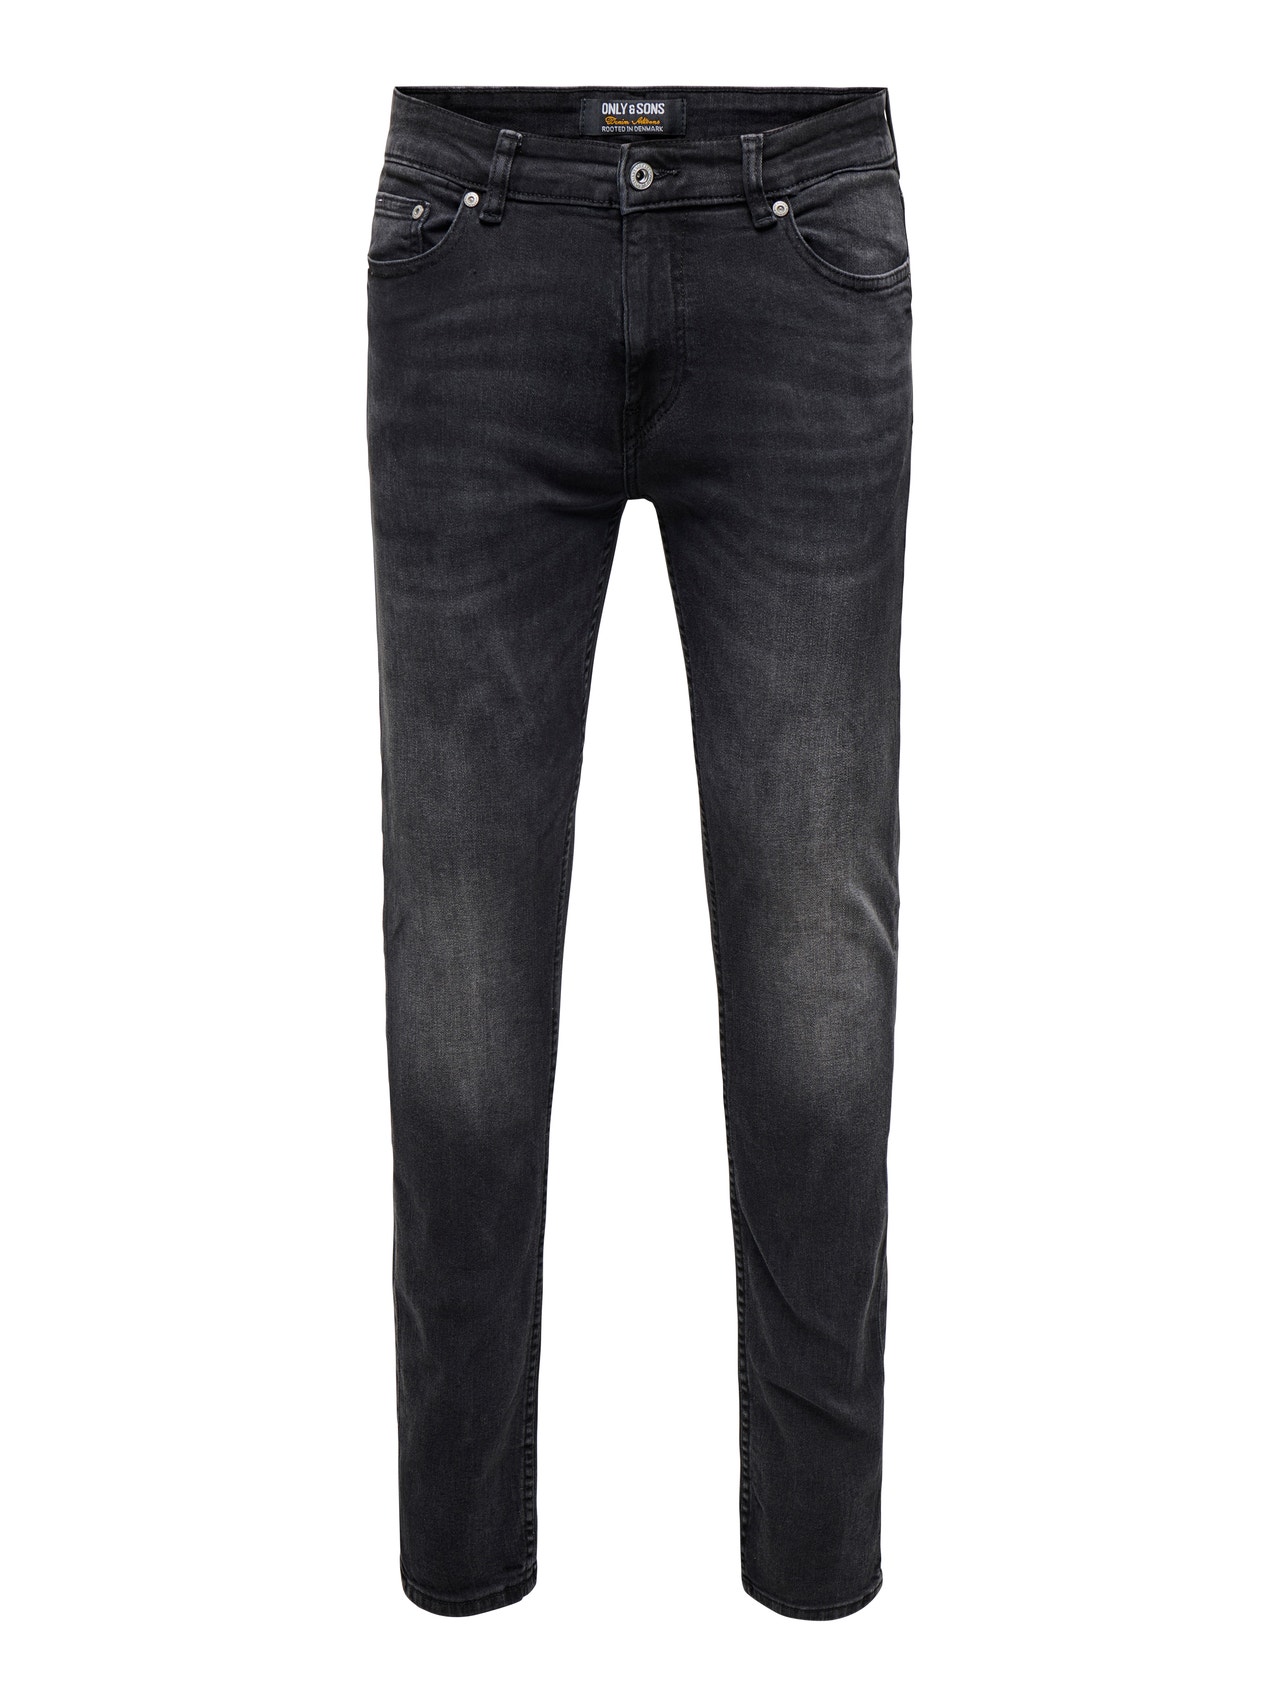 ONLY & SONS ONSWARP SKINNY WB 9095 DCC DNM NOOS -Washed Black - 22029095